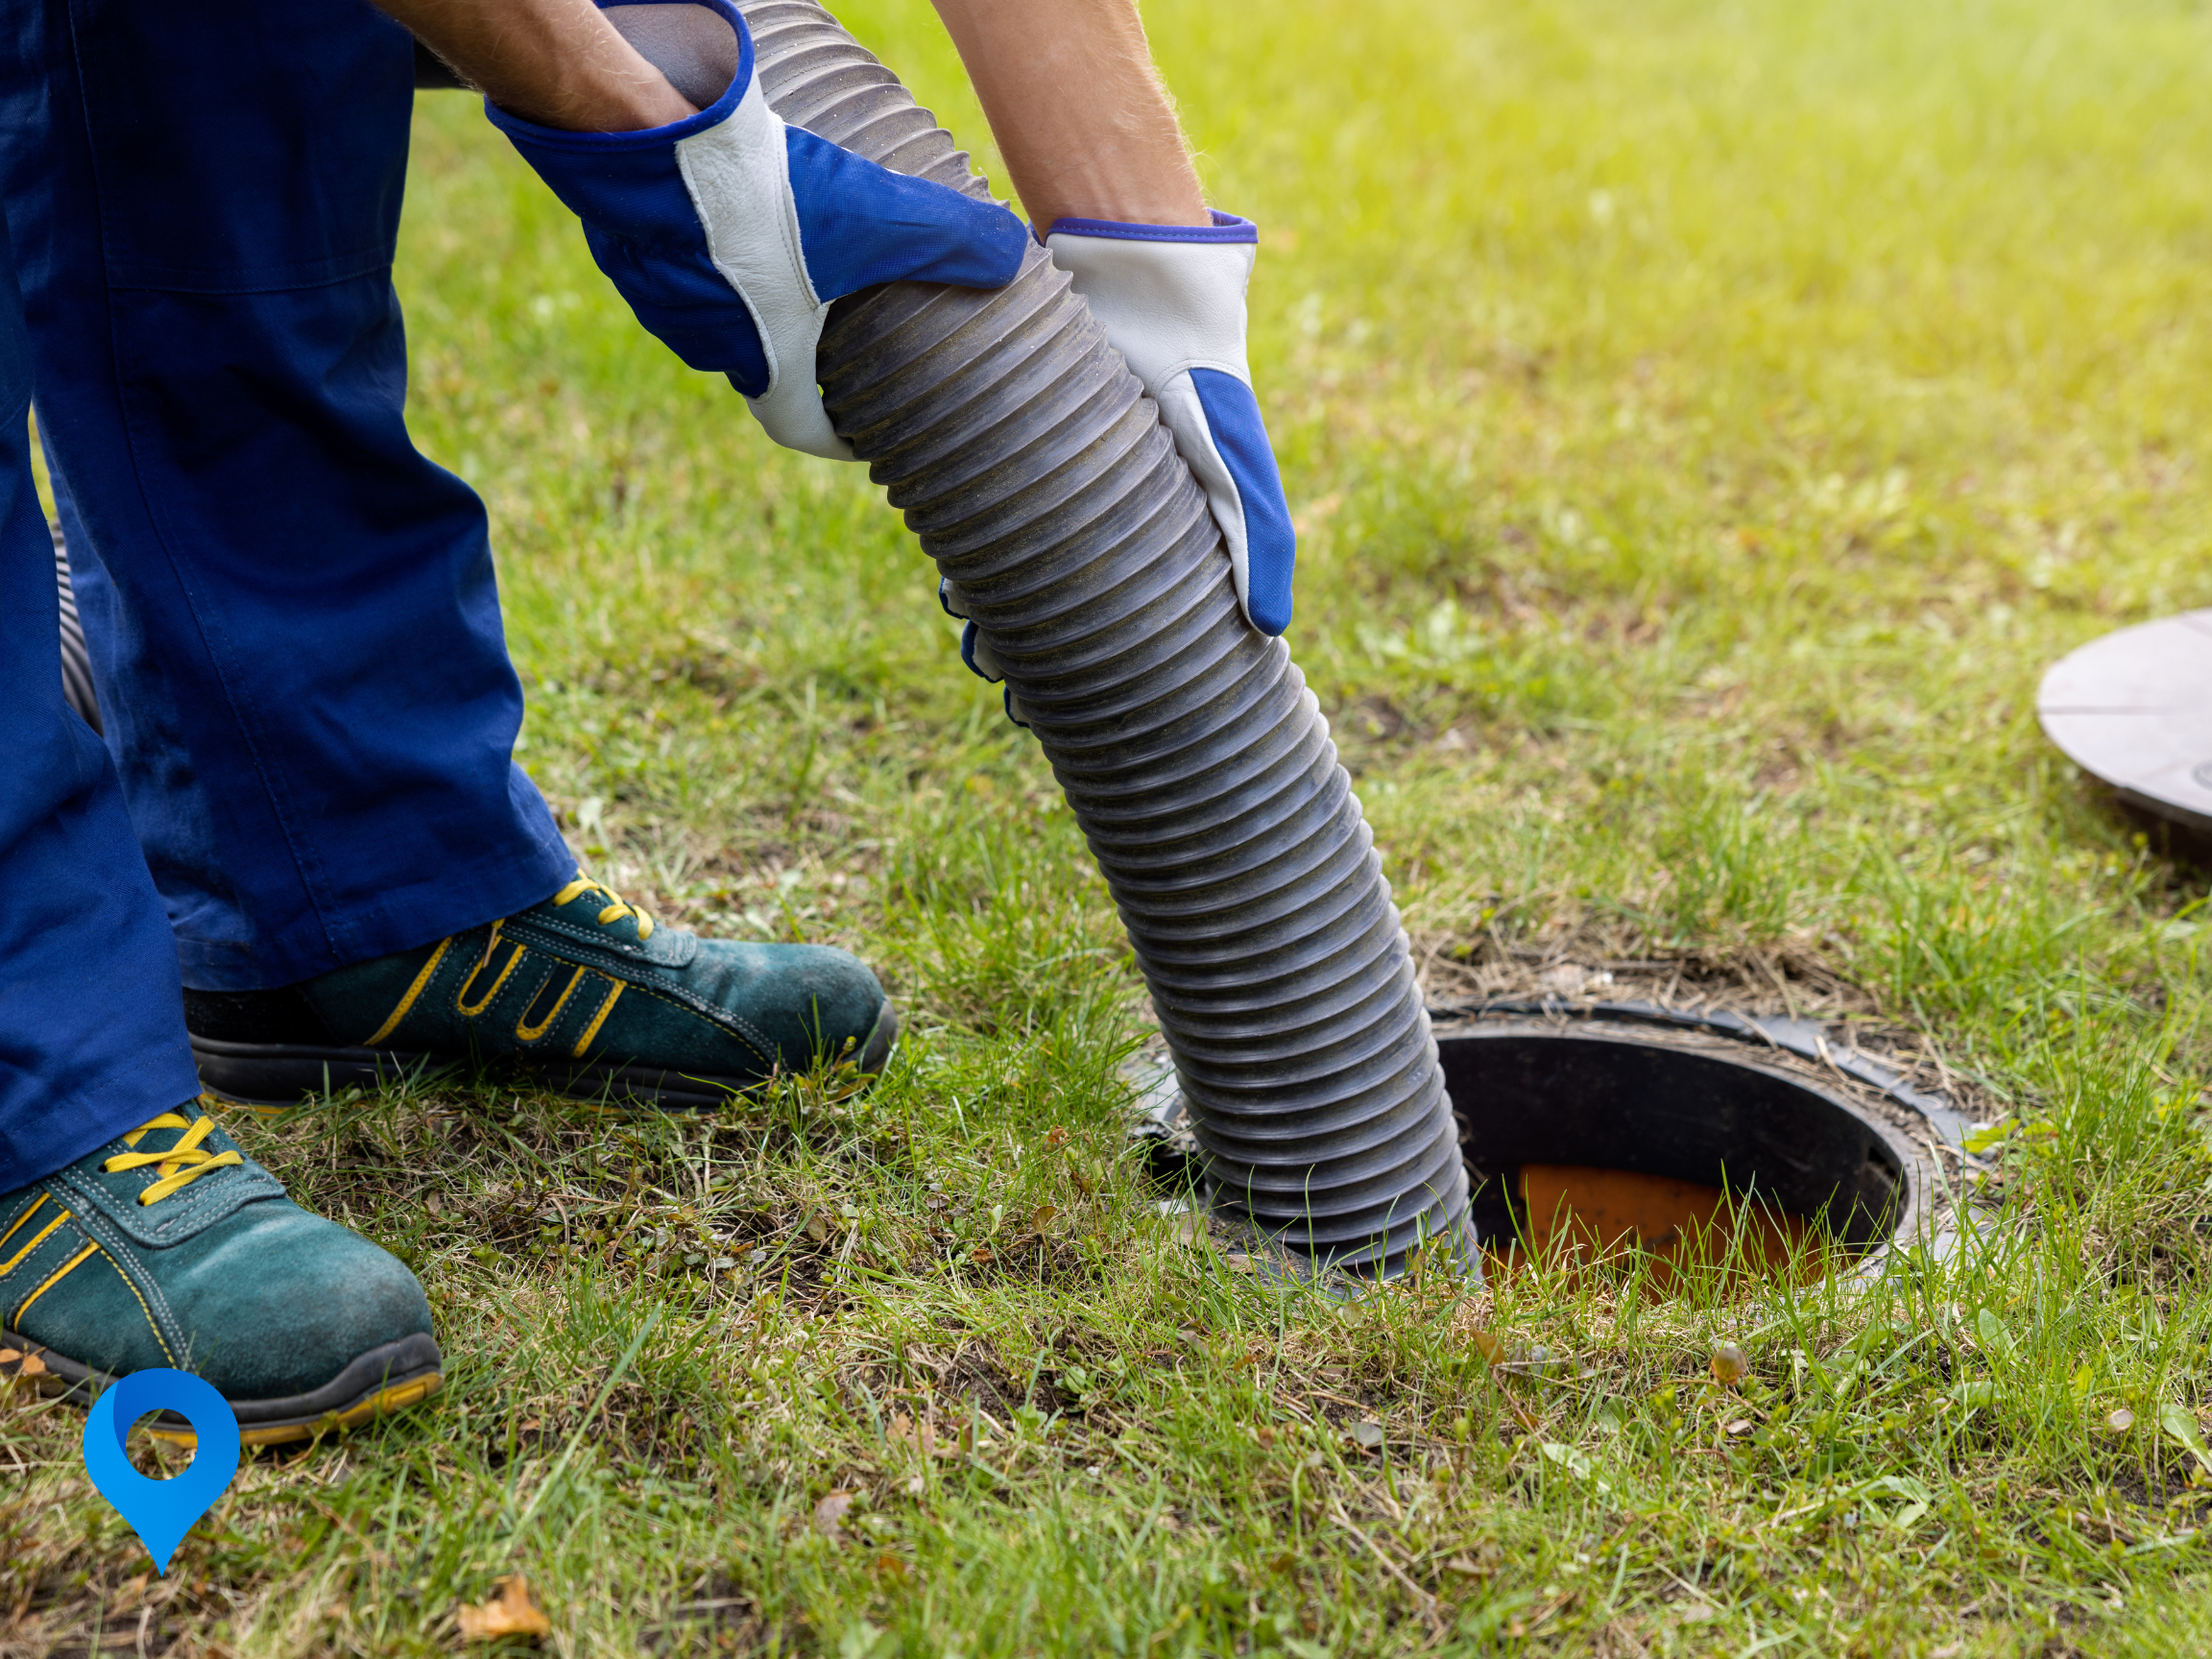 What Maintenance Tasks Are Necessary to Keep My Murfreesboro Septic System Functioning Properly?